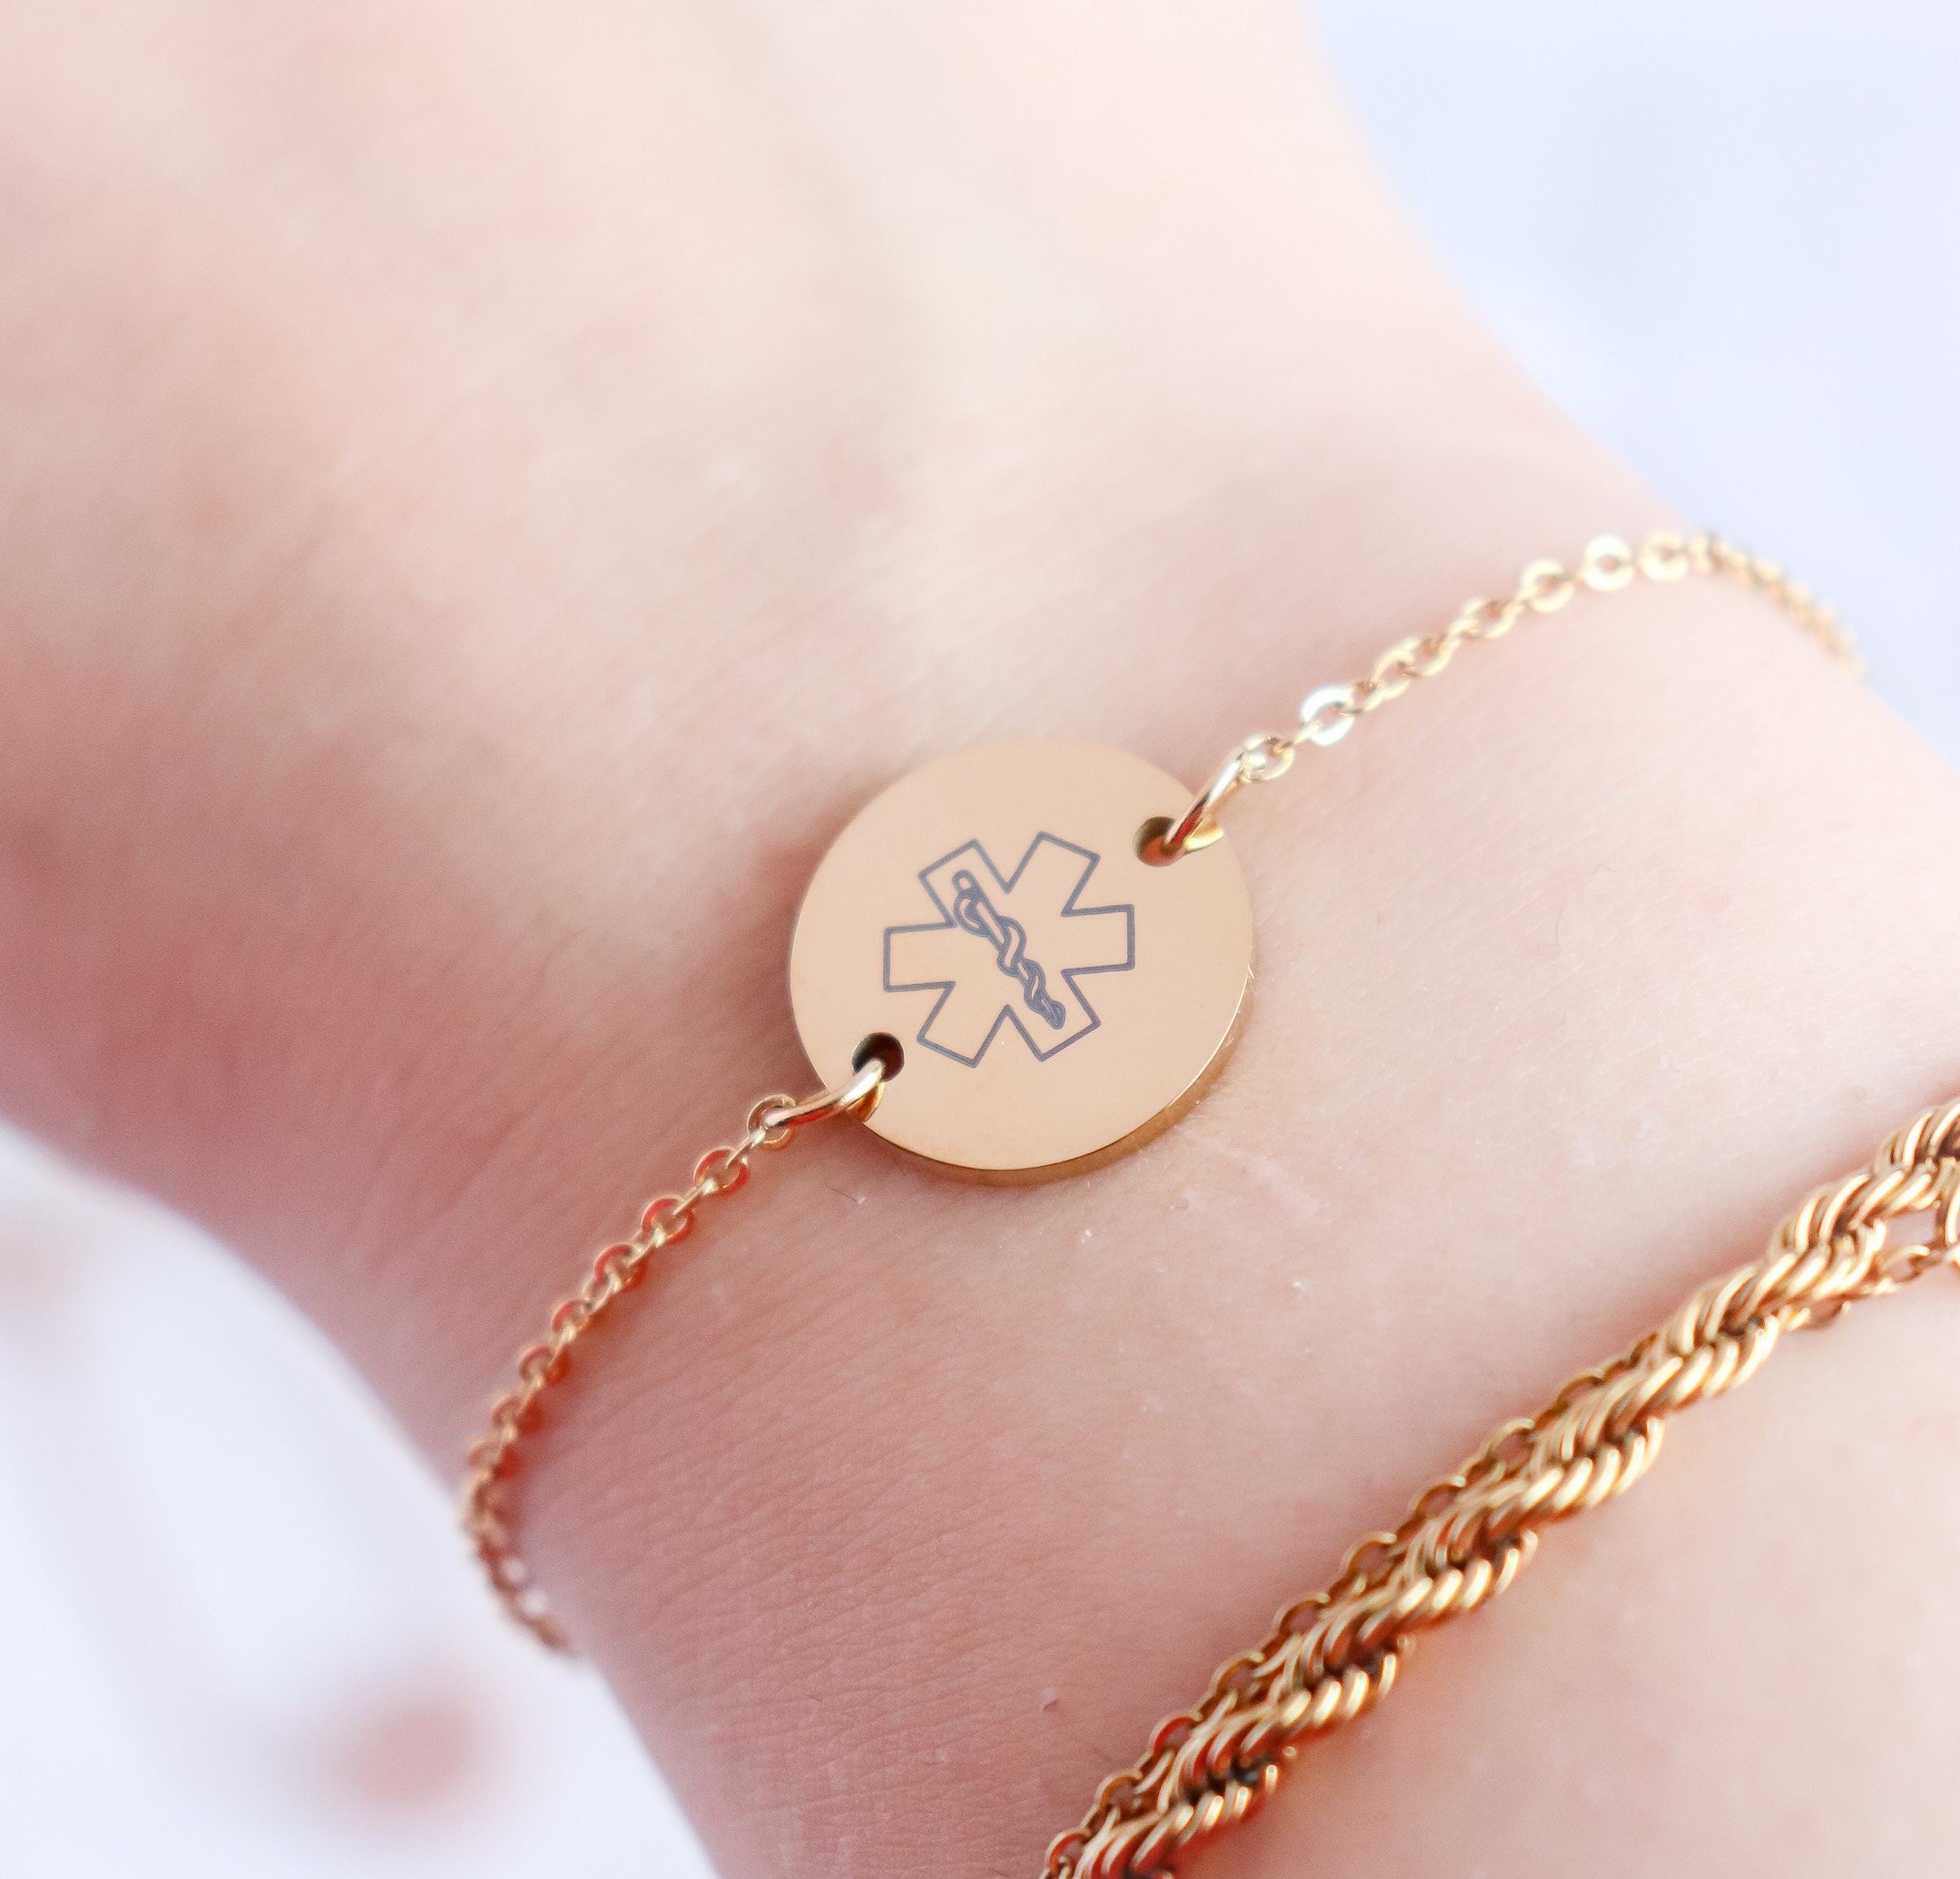 medical-alert-bracelets-and-jewelry-that-are-actually-cute-self